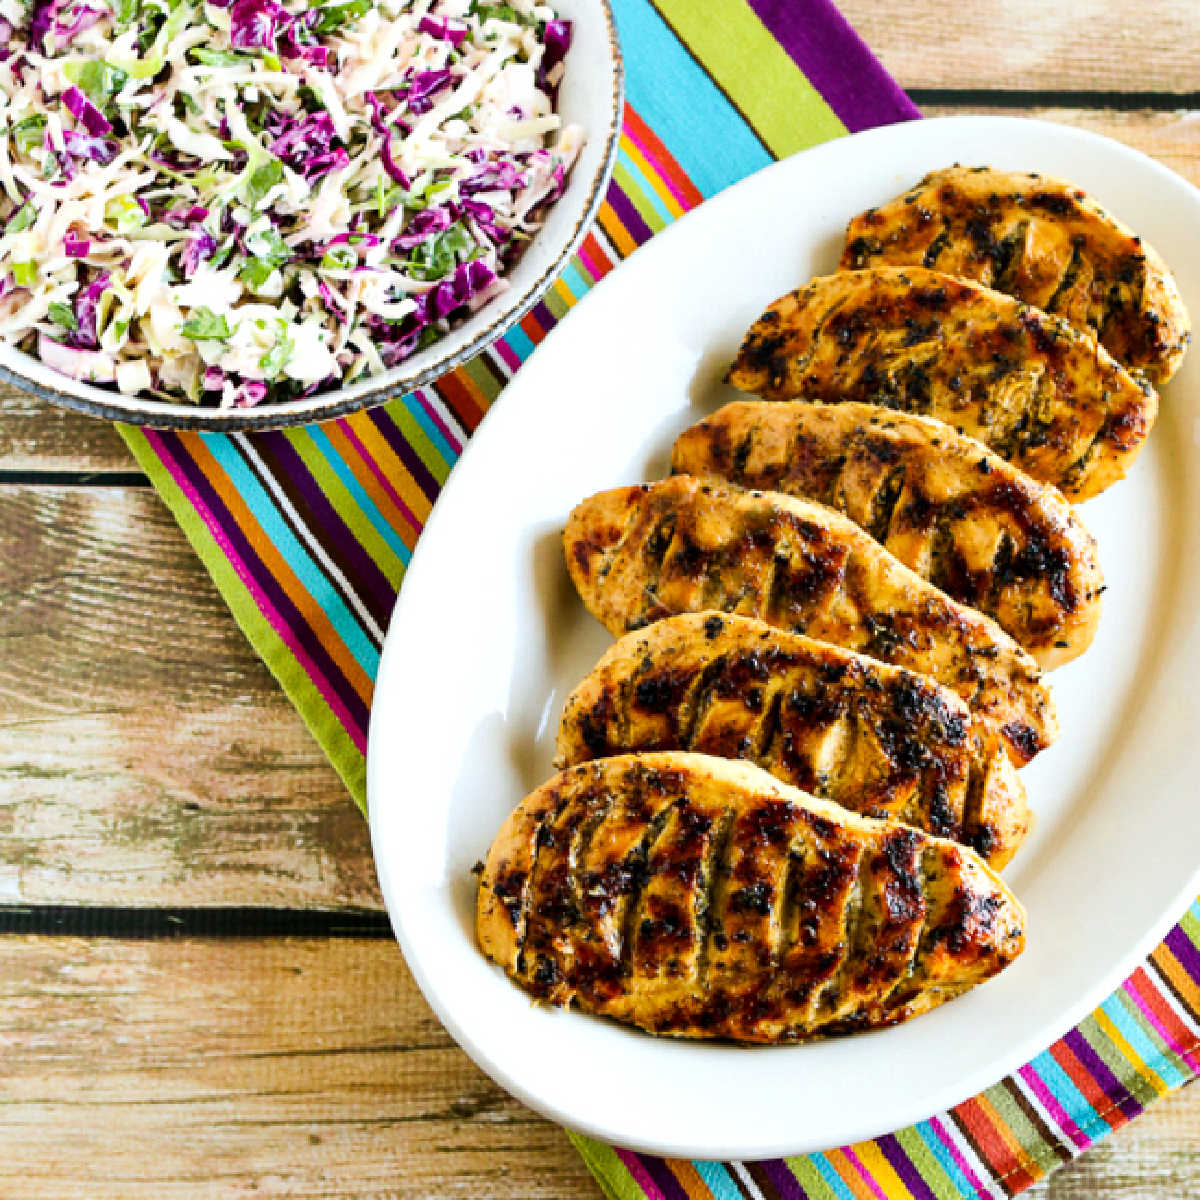 Garlic, Lemon, and Herb Grilled Chicken Breasts shown on serving platter with slaw in background.